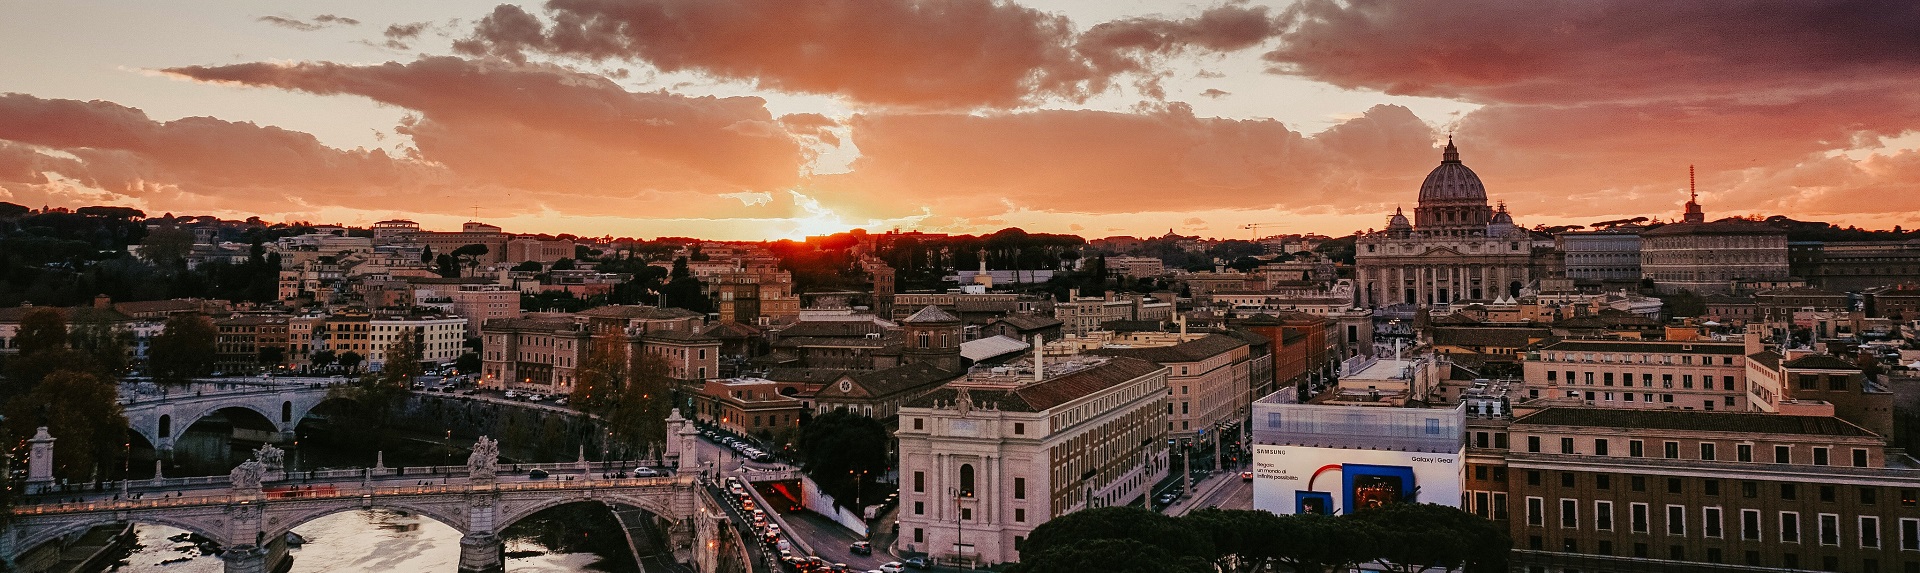 The Best Views of Rome: Where to Go for Panoramic Views of the City